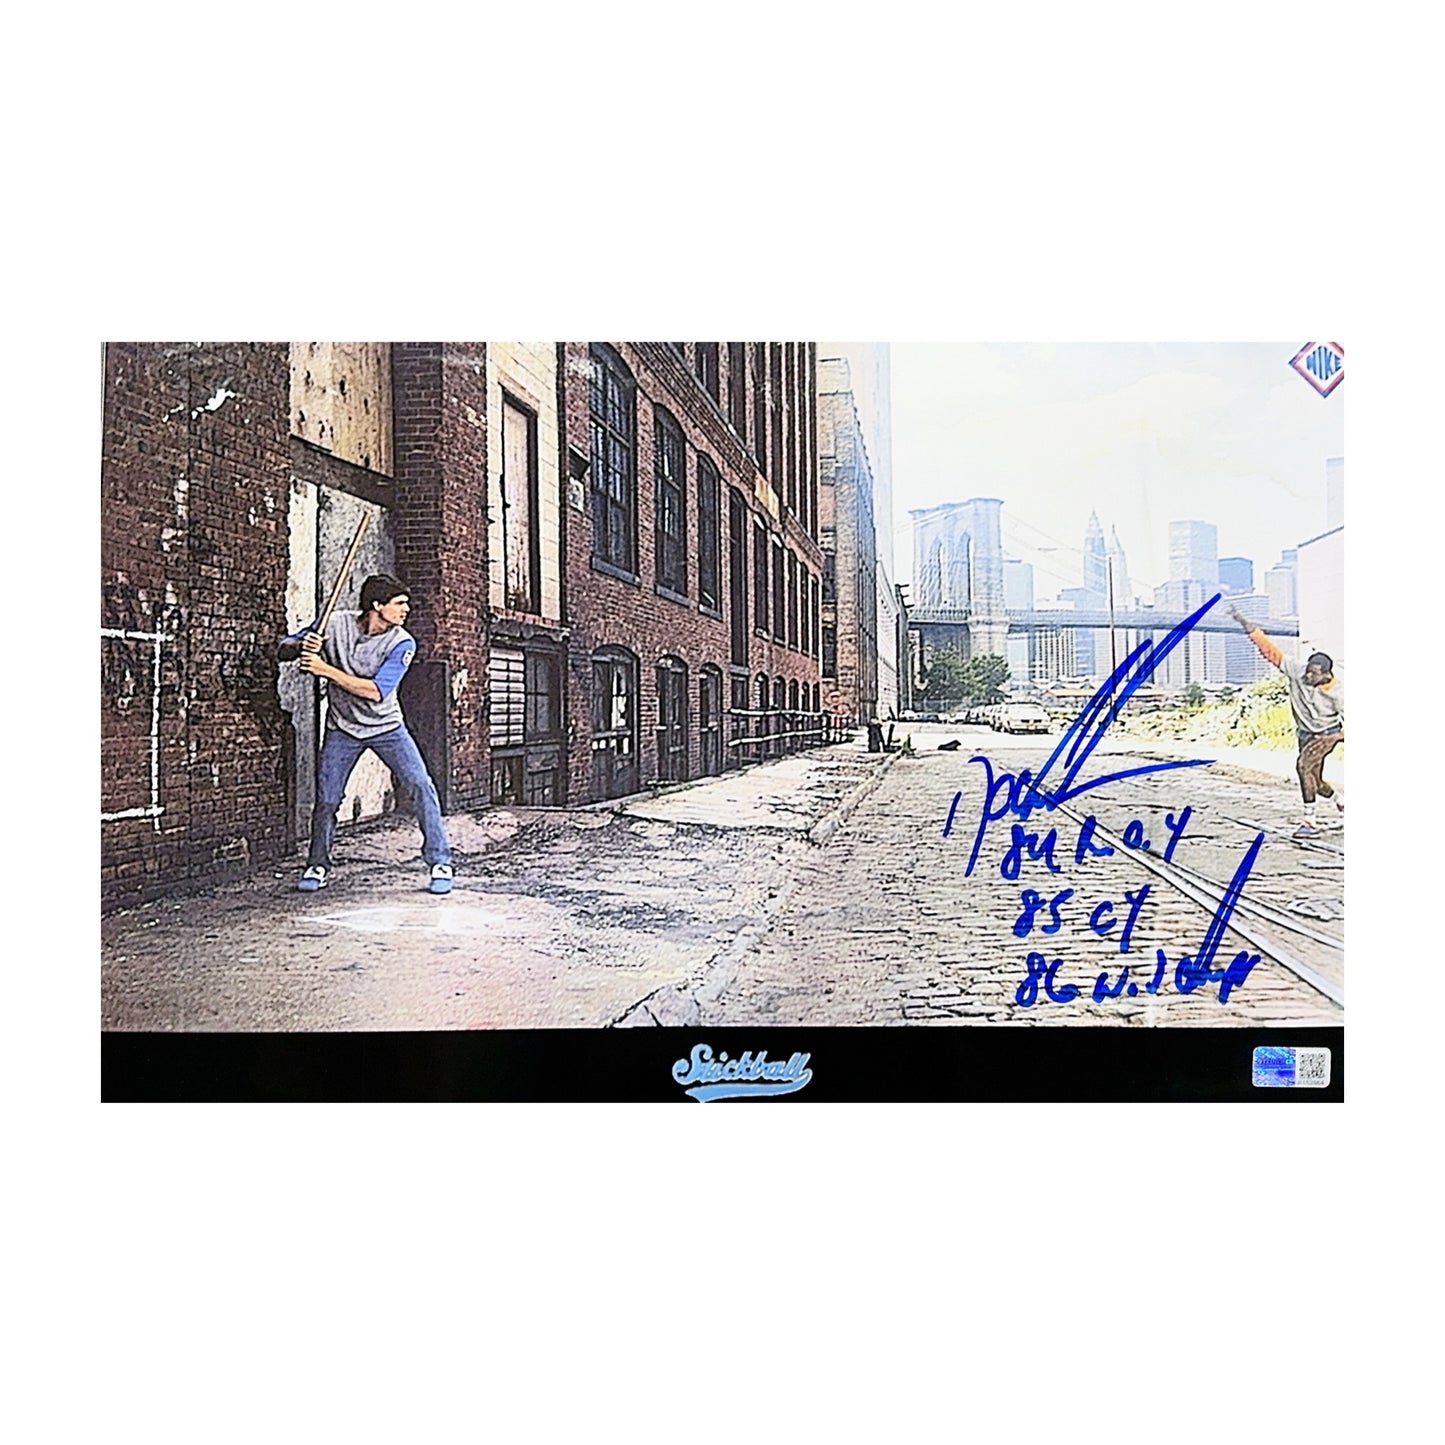 Doc Gooden Autographed New York Mets Nike Stickball Ad 8x13 Photo “84 ROY, 85 Cy, 86 WS Champs” Inscriptions Steiner CX